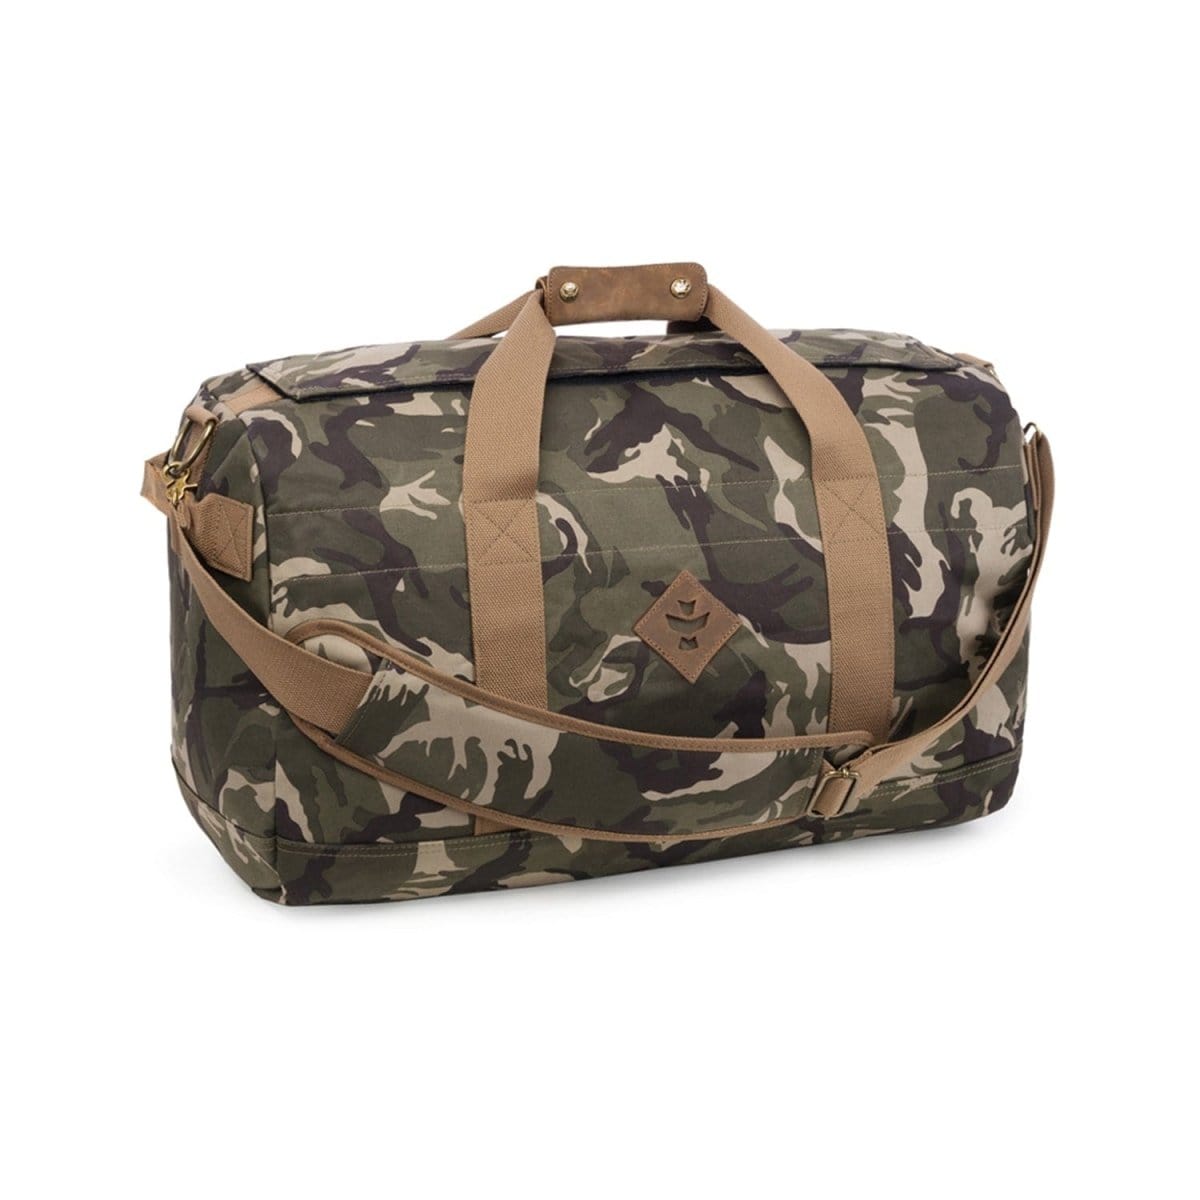 Revelry Supply Travel Bag Camo Brown The Around-Towner - Smell Proof Medium Duffle